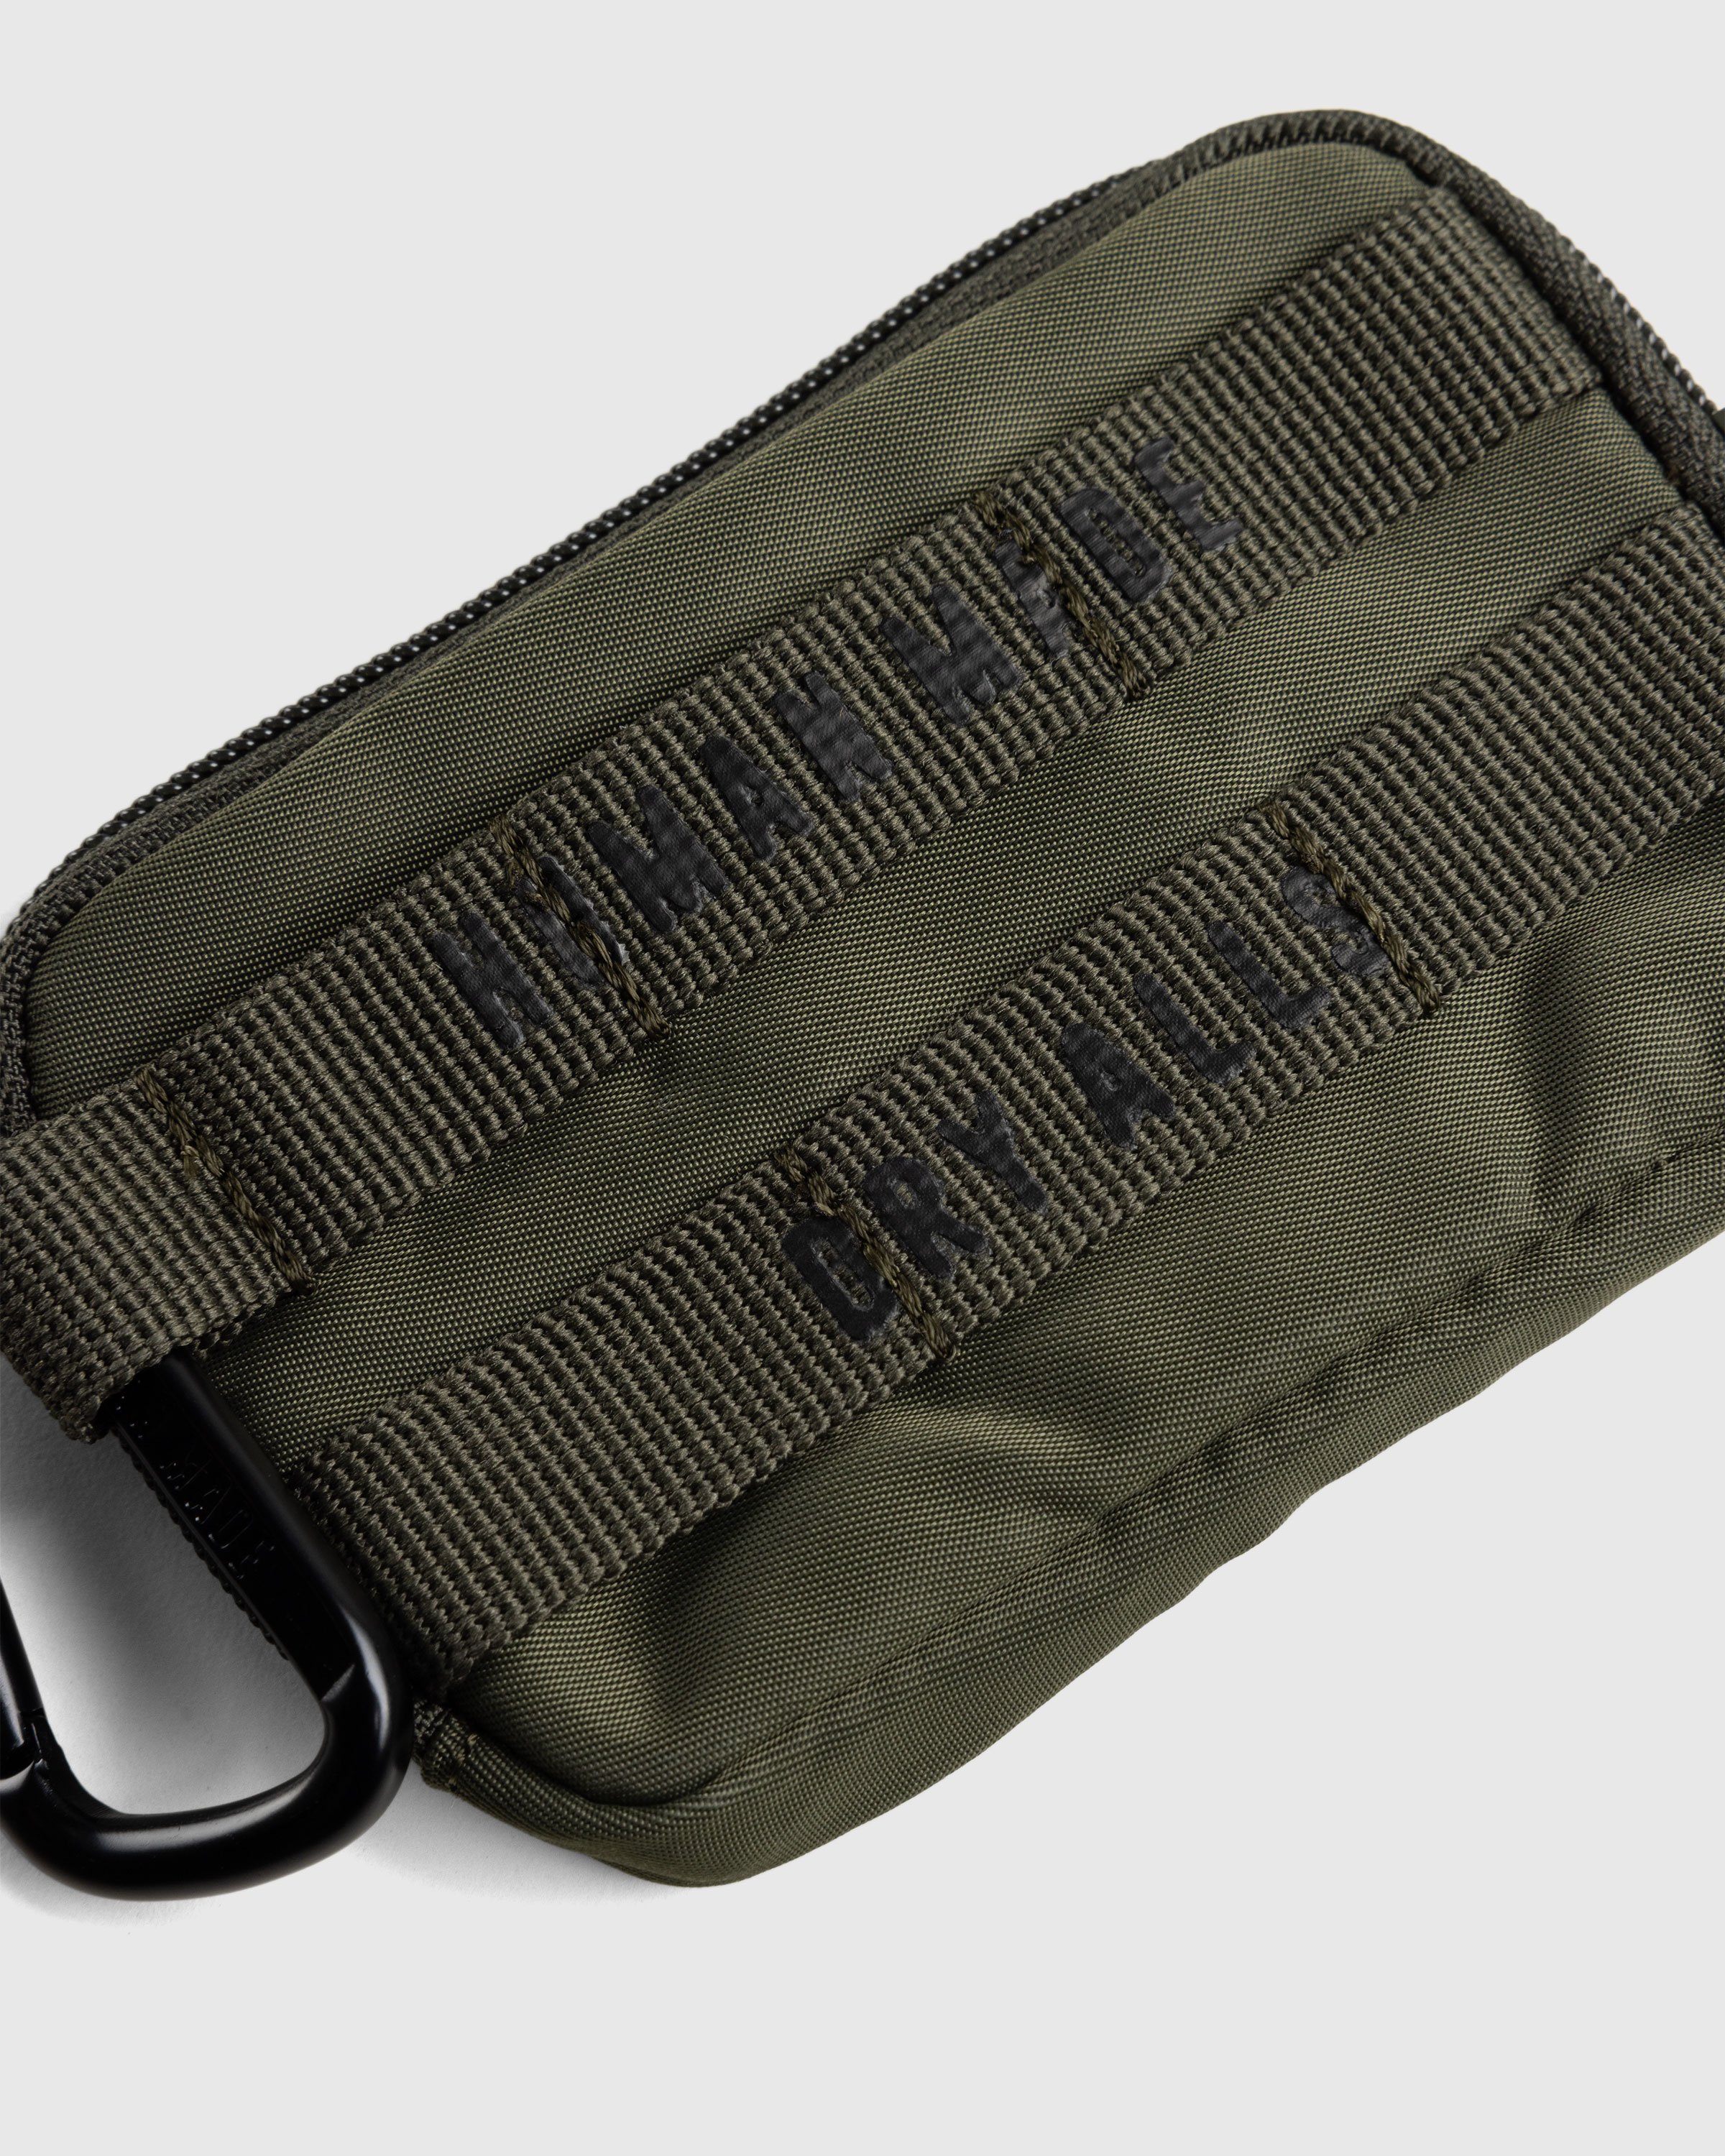 Human Made - MILITARY CARD CASE Olive Drab - Accessories - Green - Image 4